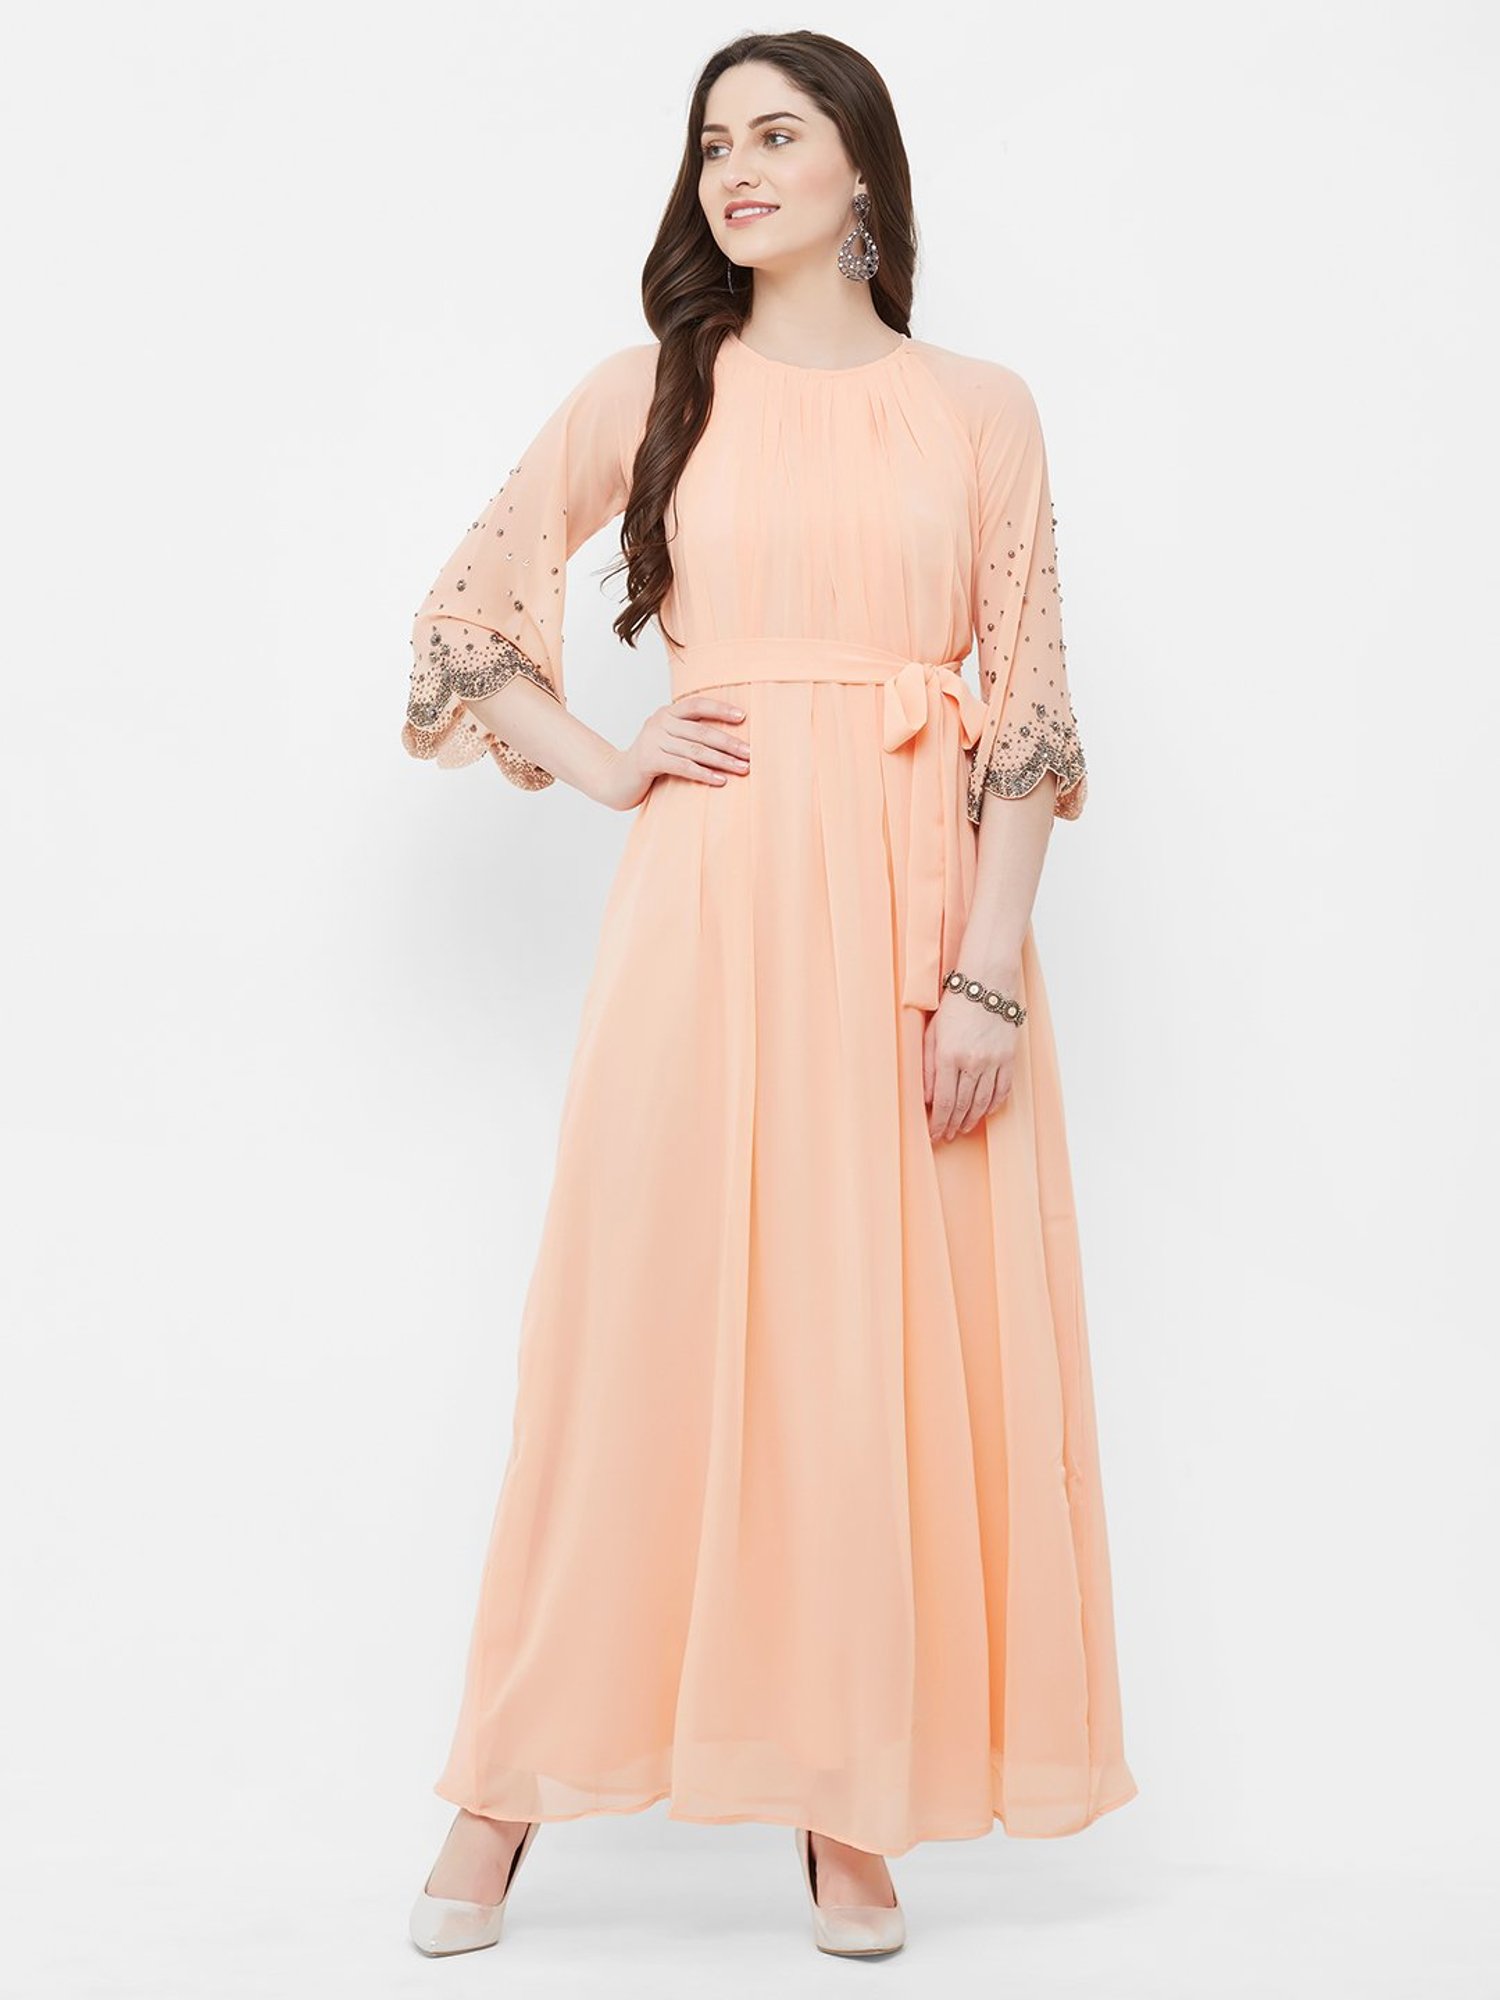 Buy Off White & Peach-Coloured Embellished Sequinned Semi-Stitched Myntra  Lehenga from Ethnic Plus